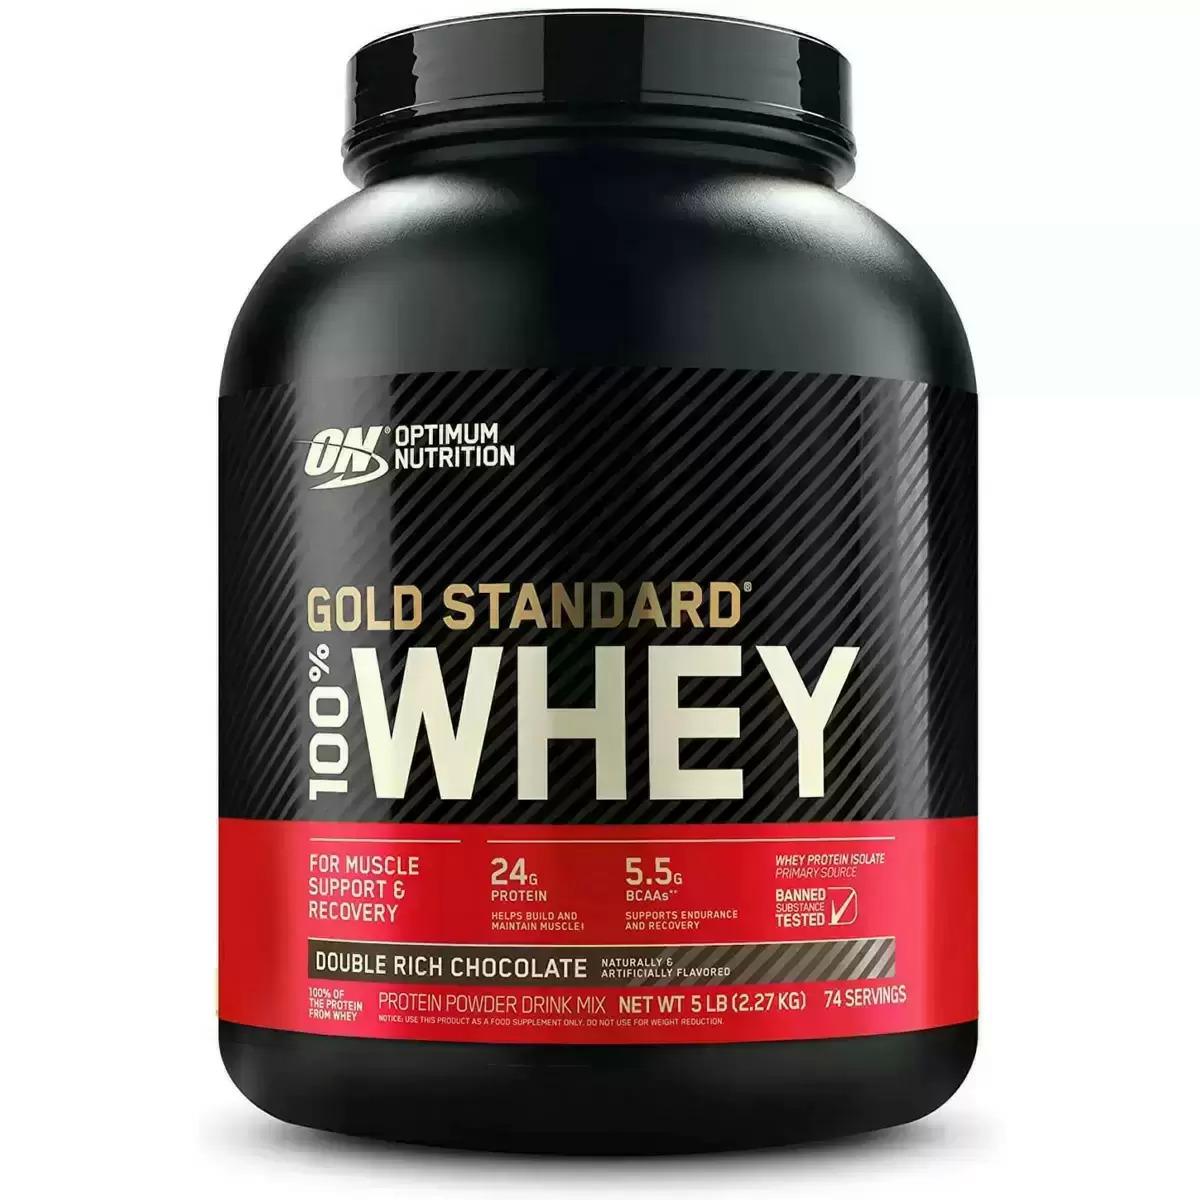 Optimum Nutrition Gold Standard Whey Protein Powder Rich Chocolate for $39.63 Shipped